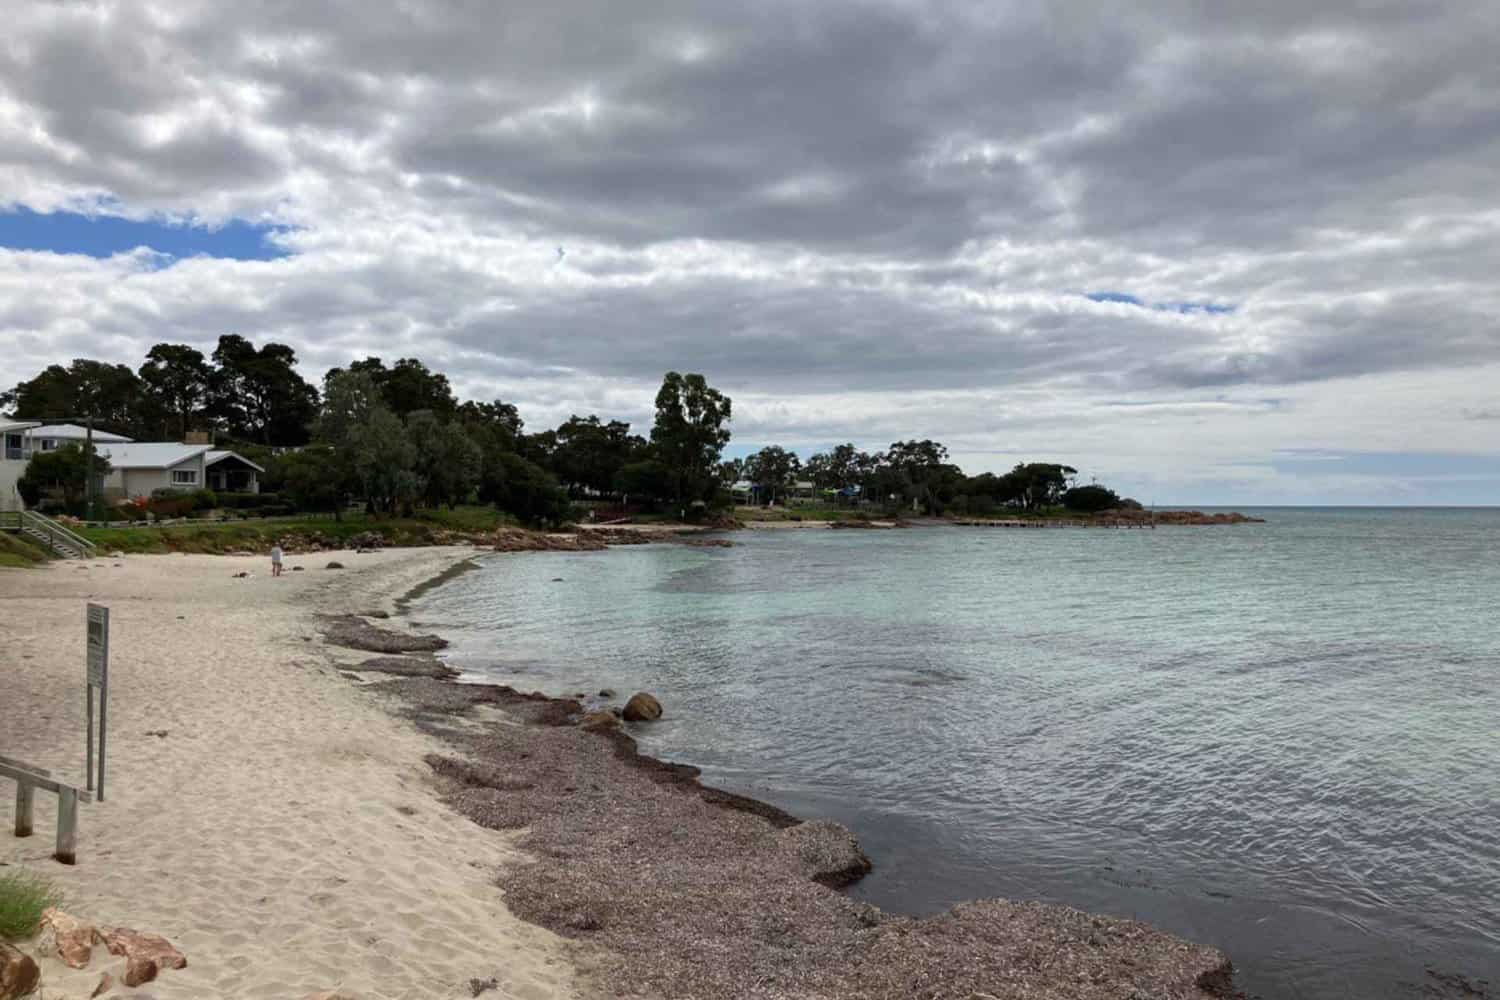 Cloudy sky over the peaceful Old Dunsborough Beach with beachfront houses nestled among trees.